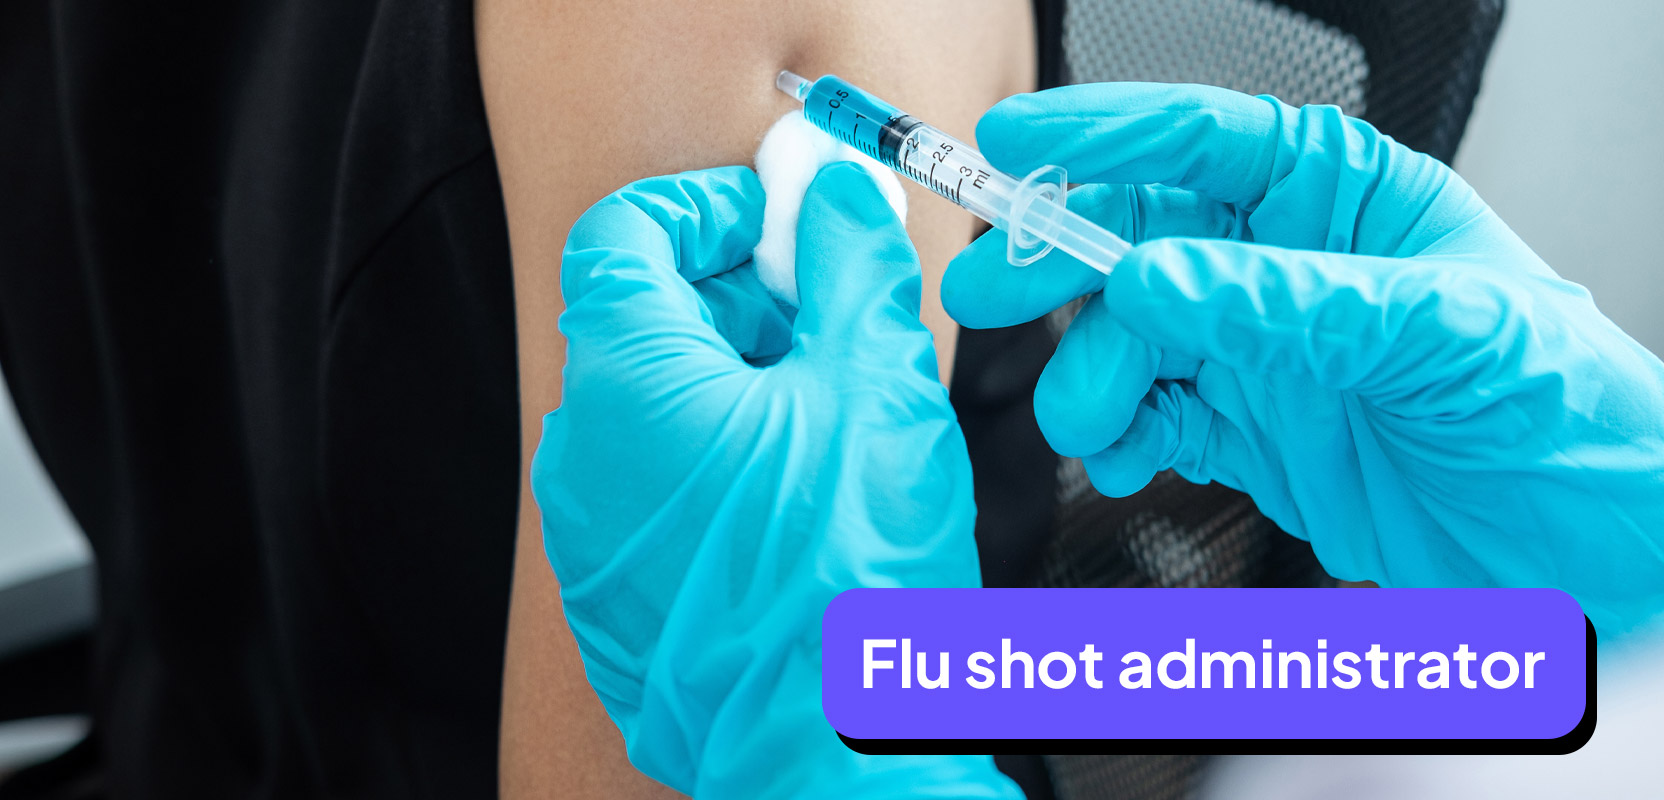 Nurse with gloved hands injecting a flu shot into person's arm